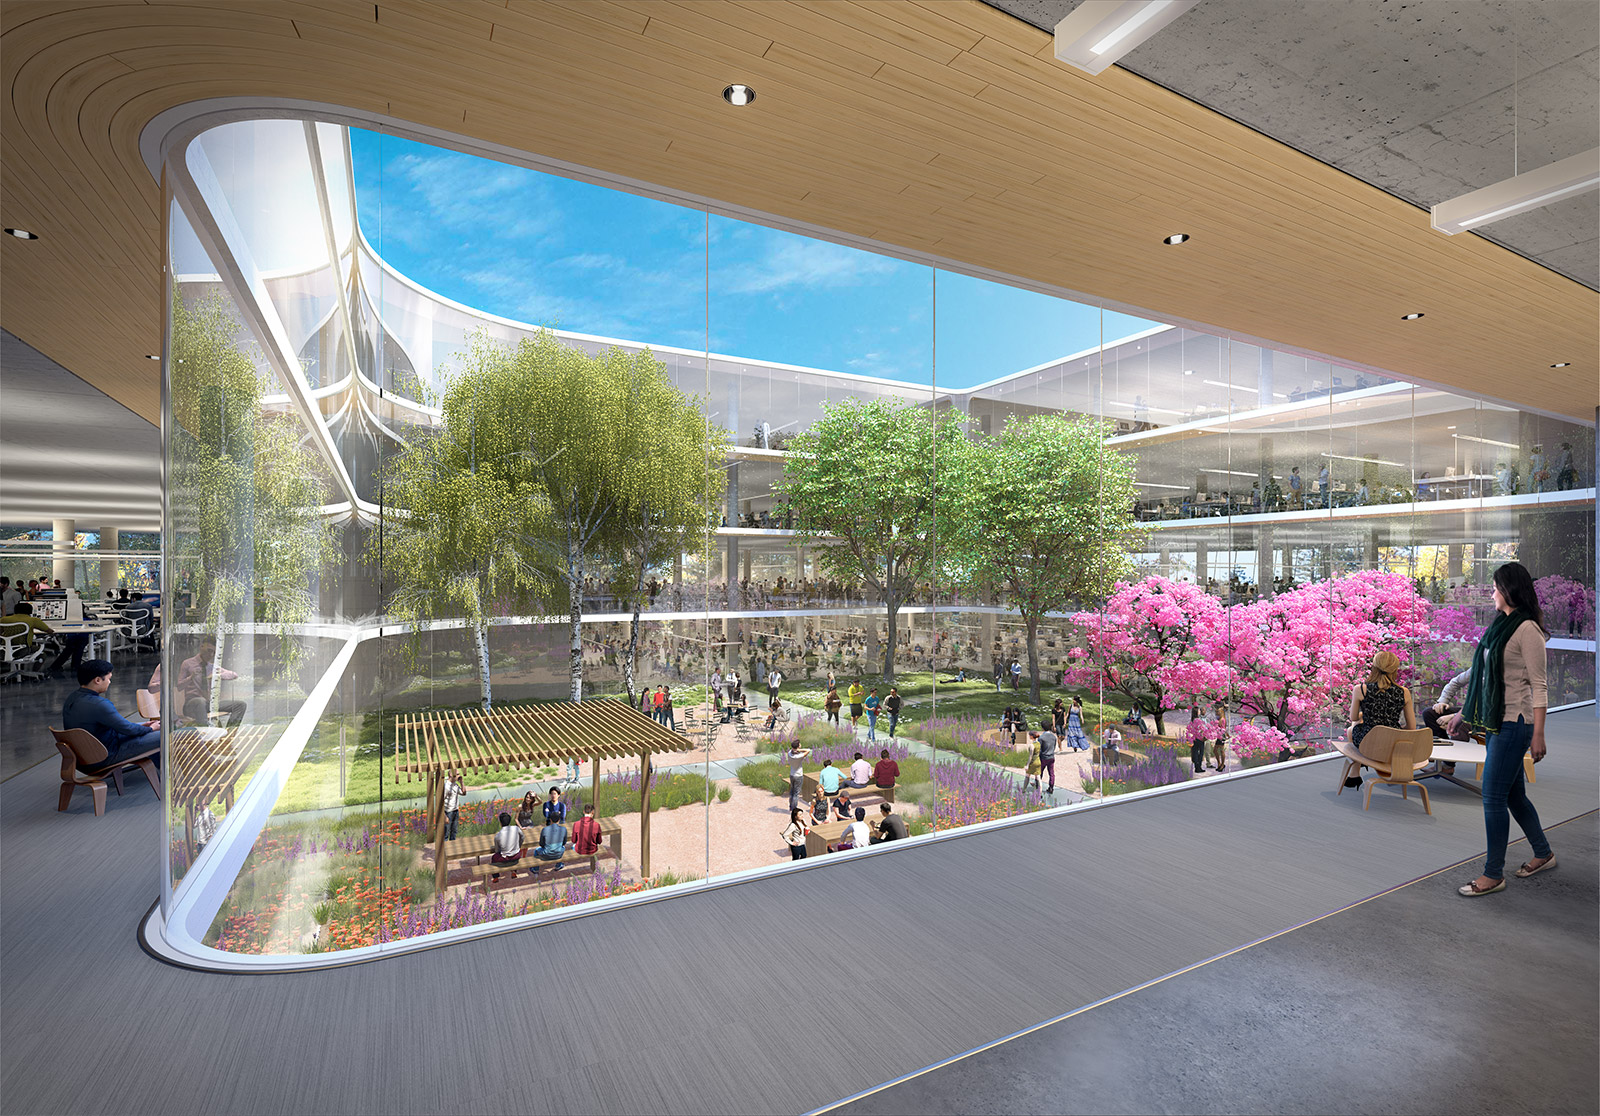 Apple Signs Massive Deal for New Campus in Sunnyvale? [Images]